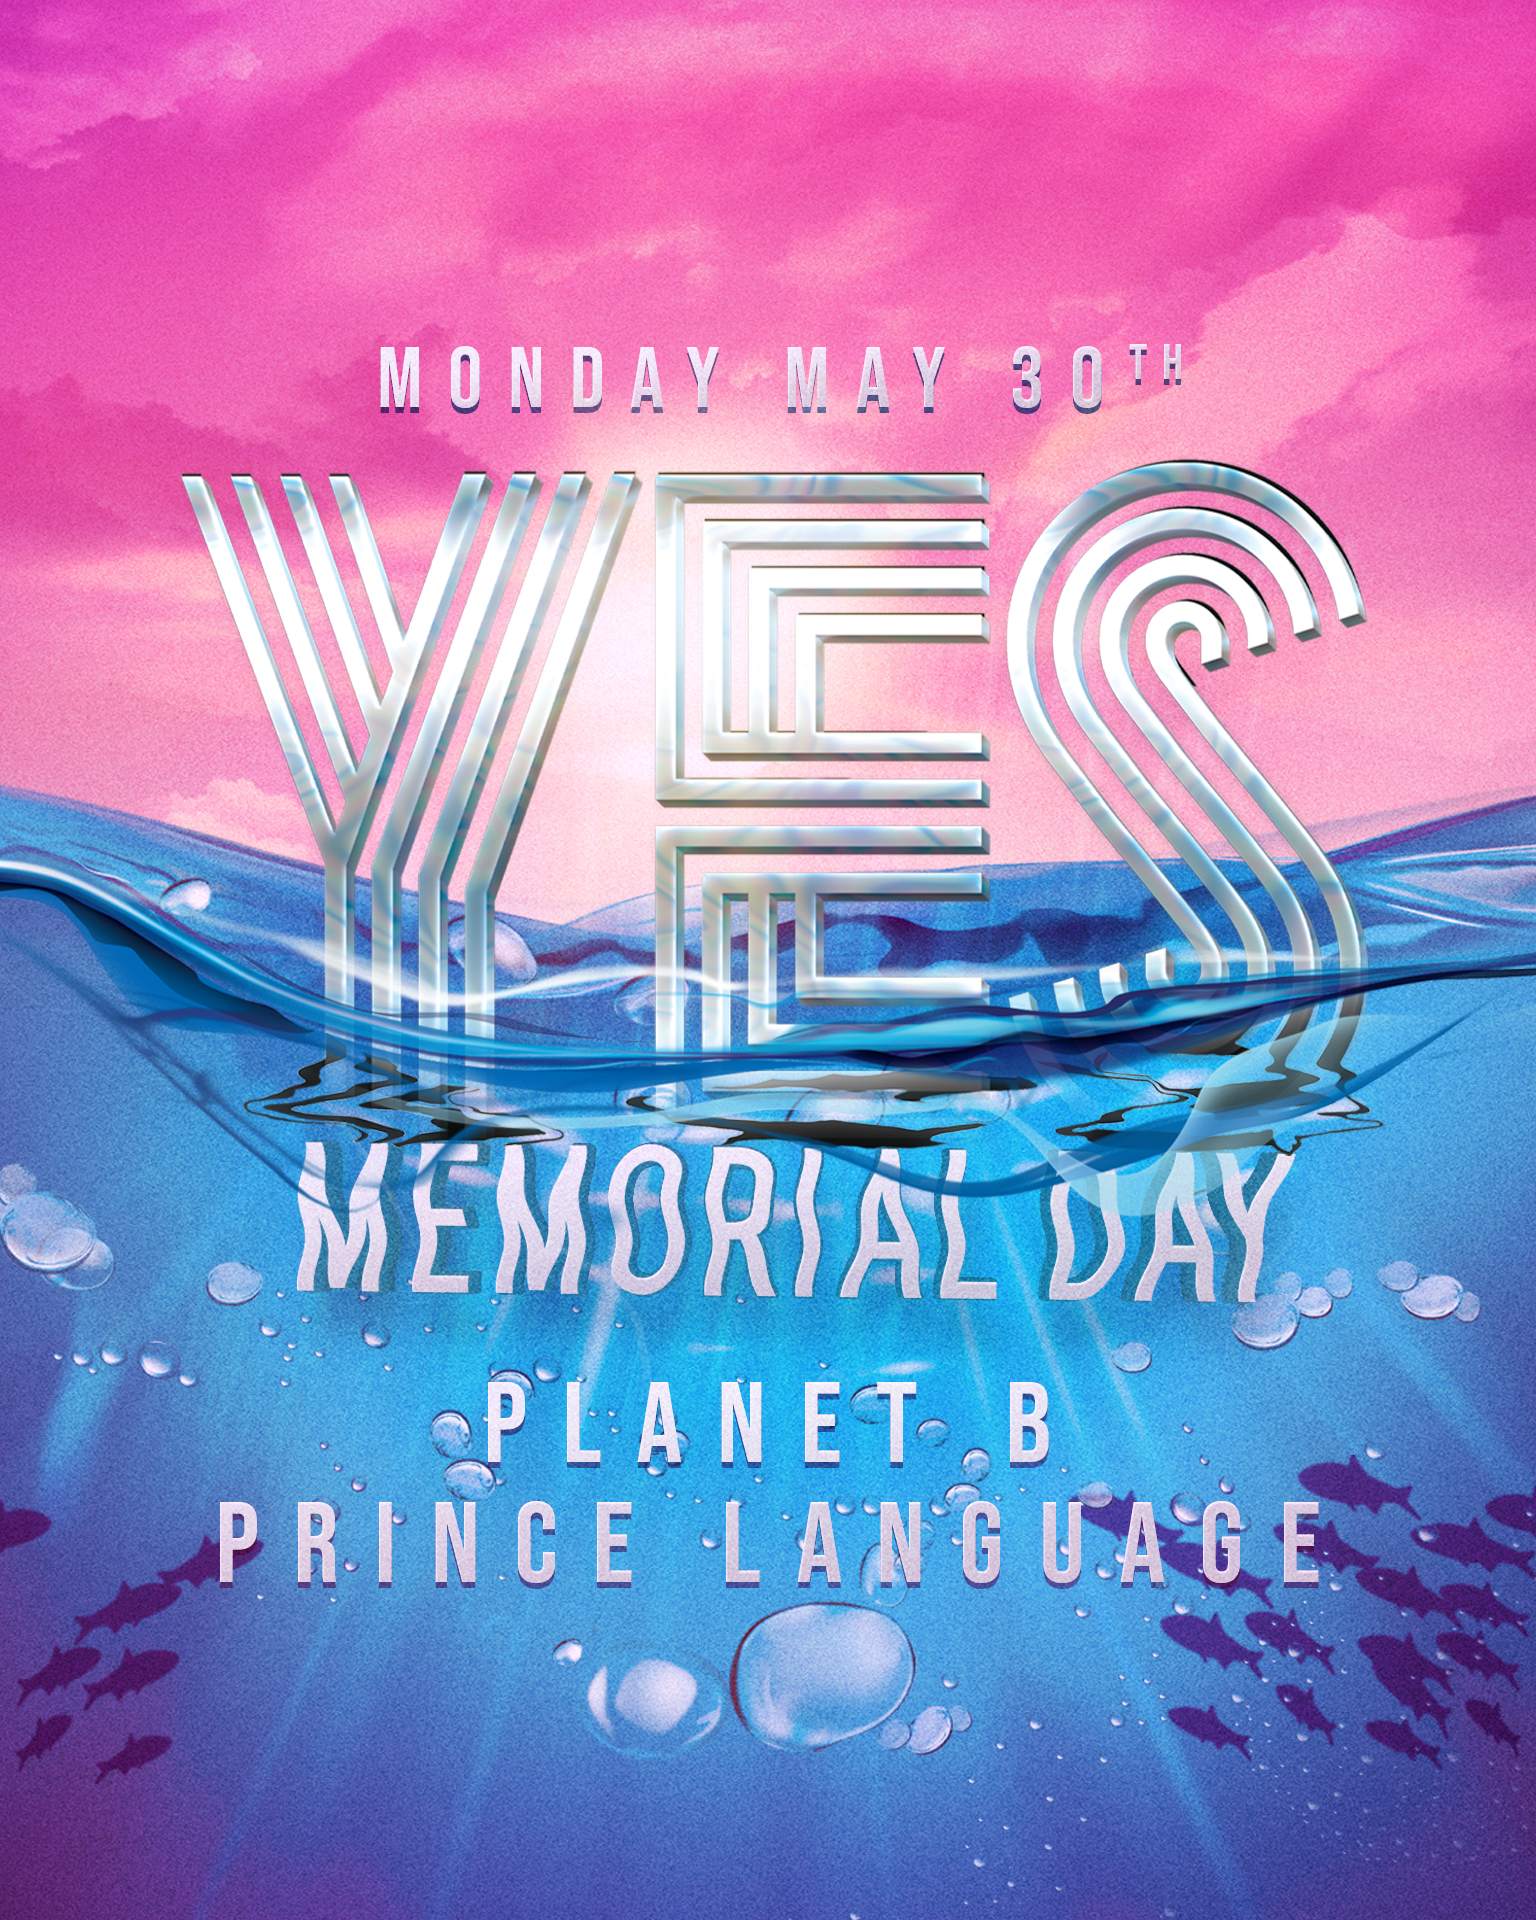 Planet B - Prince Language - YES MEMORIAL DAY PARTY - Página frontal